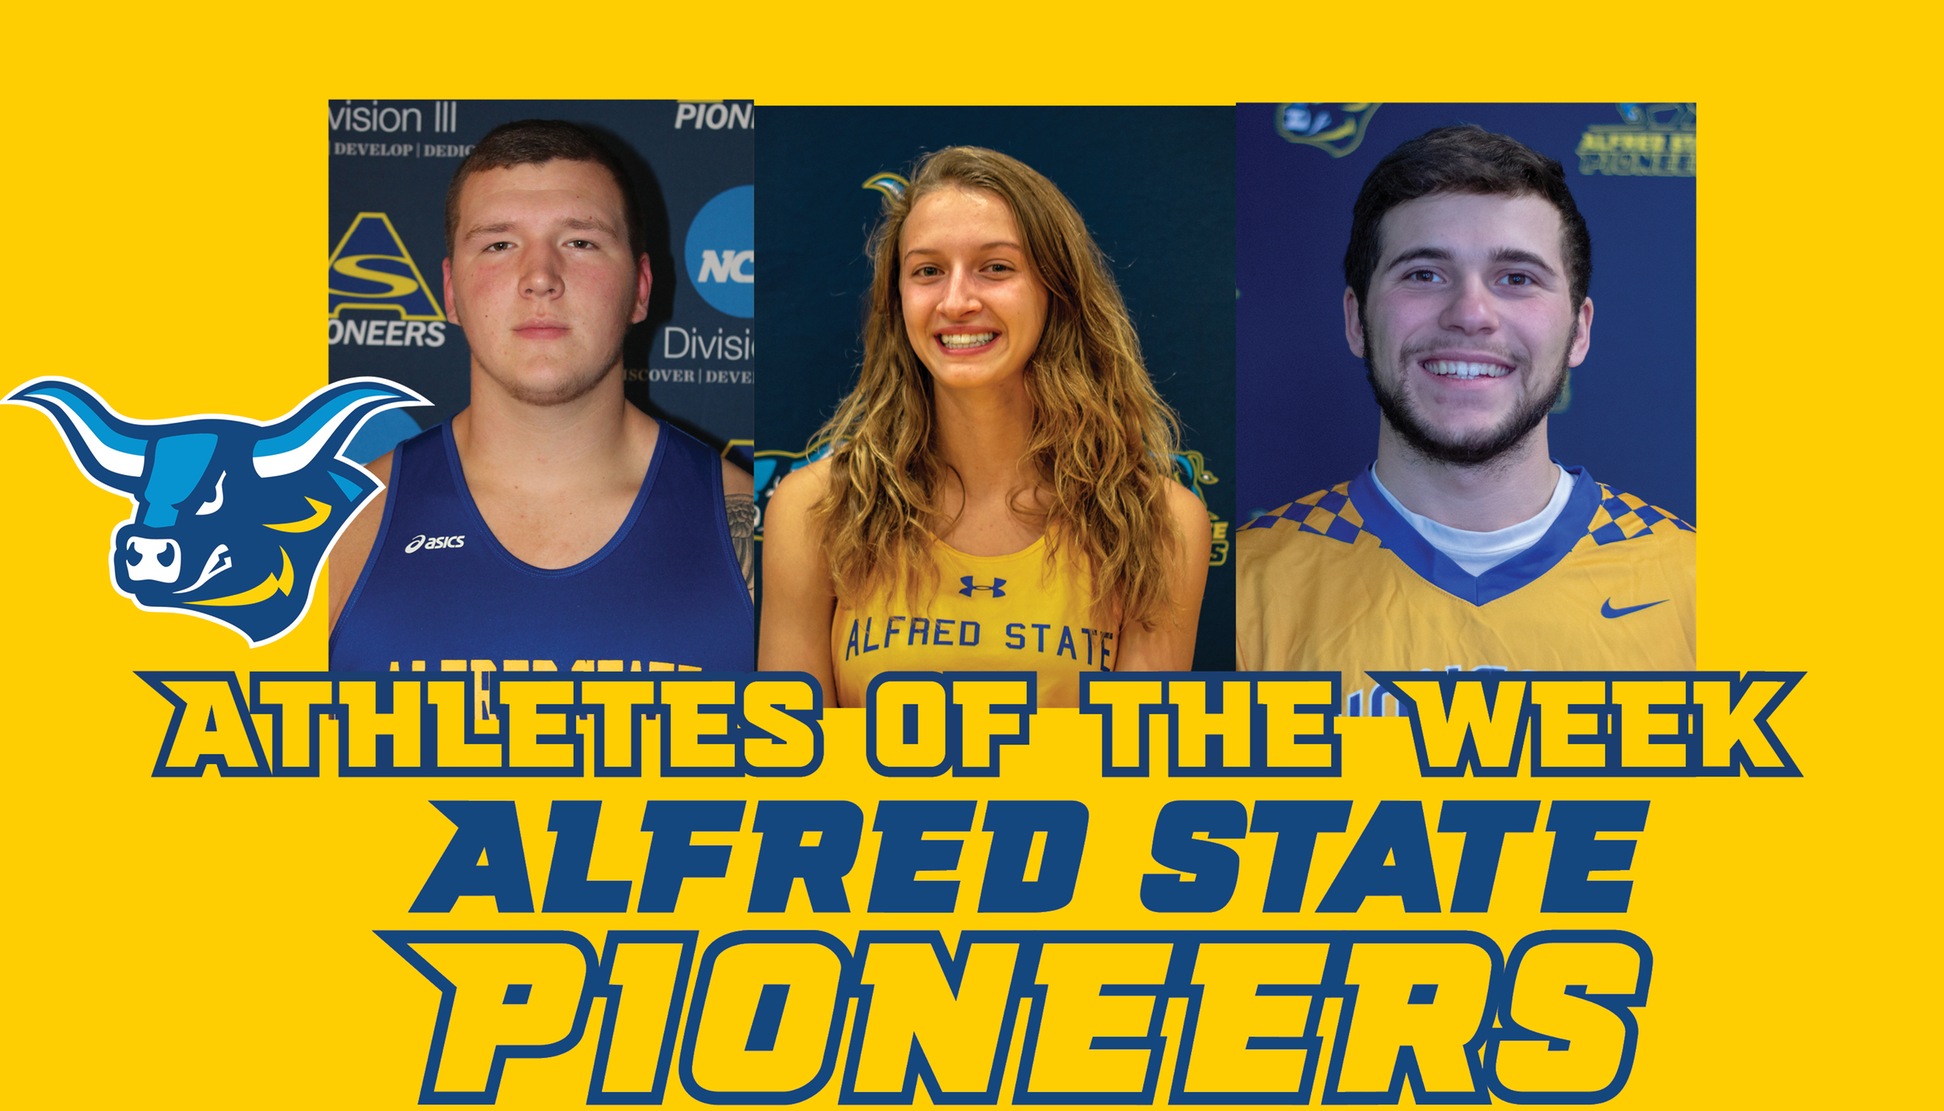 Paul Kemsley, Emily Brigman, and Nic Covelli Named Athletes of the Week